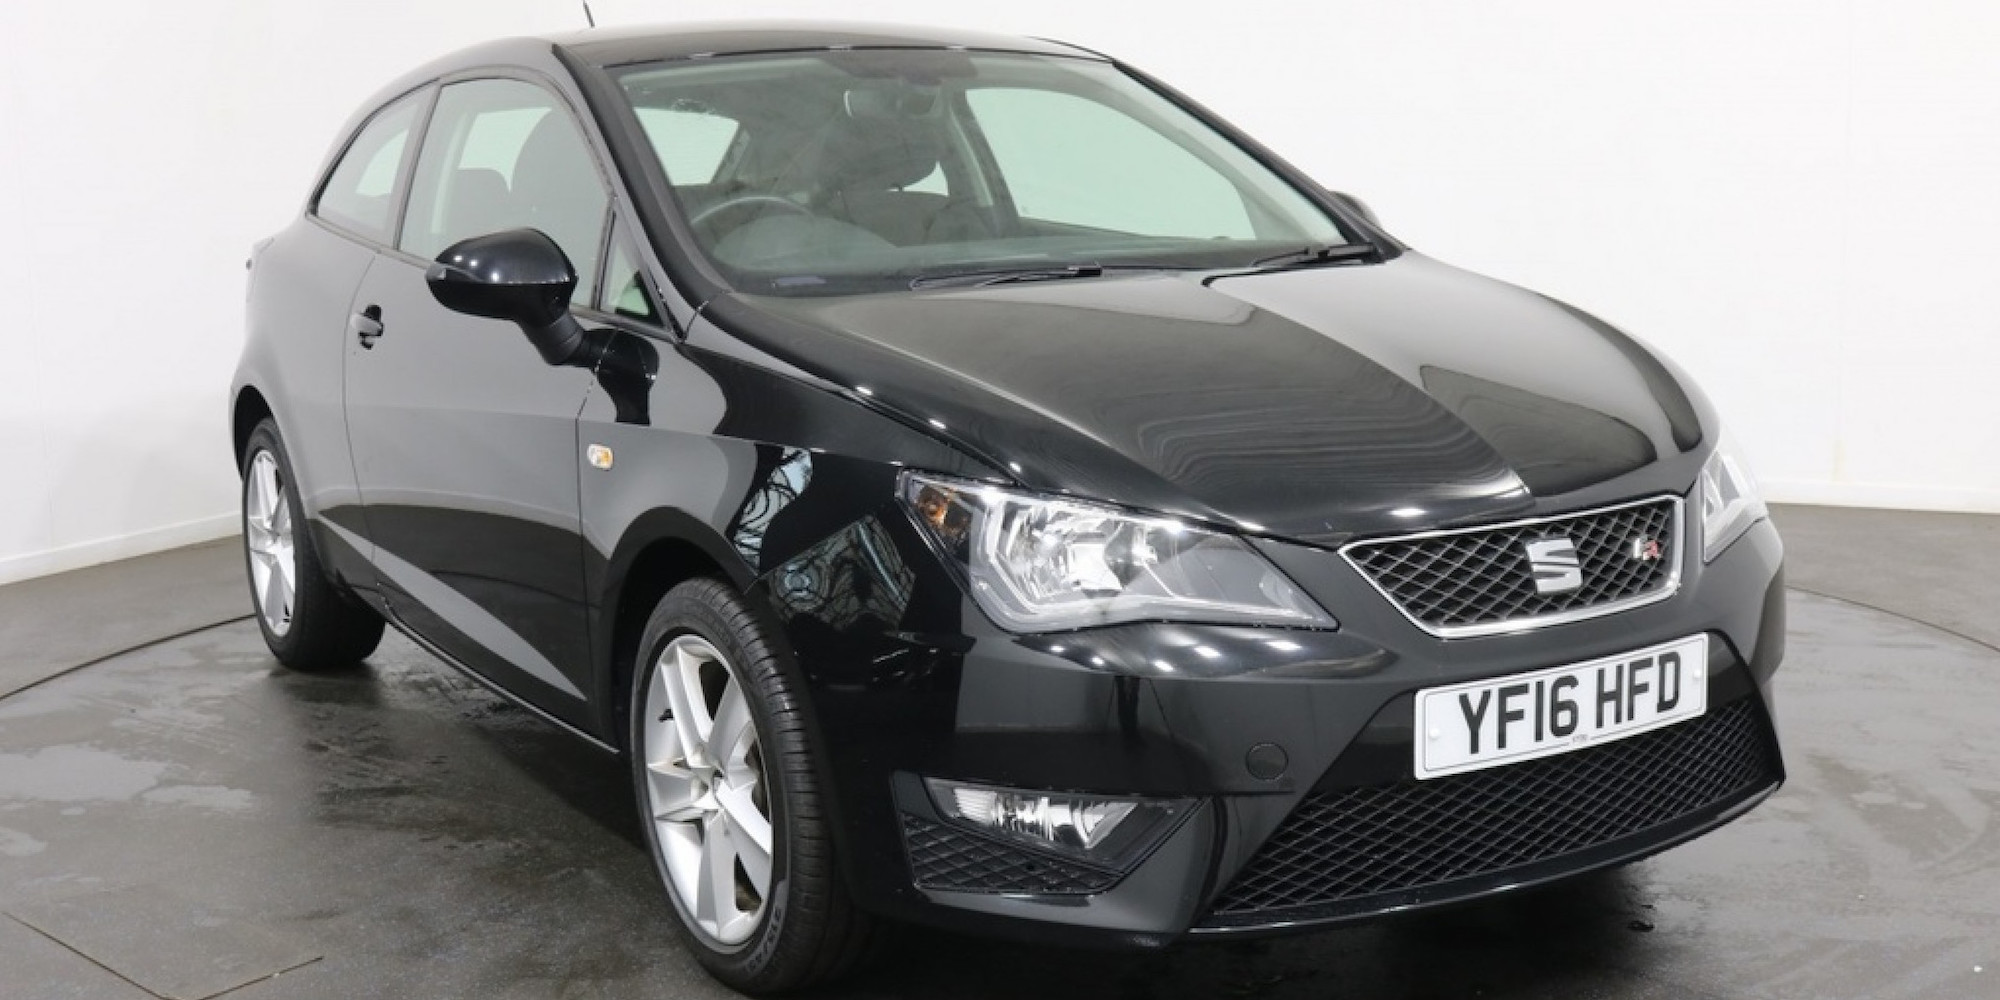 Black SEAT Ibiza parked in showroom, facing three-quarters right